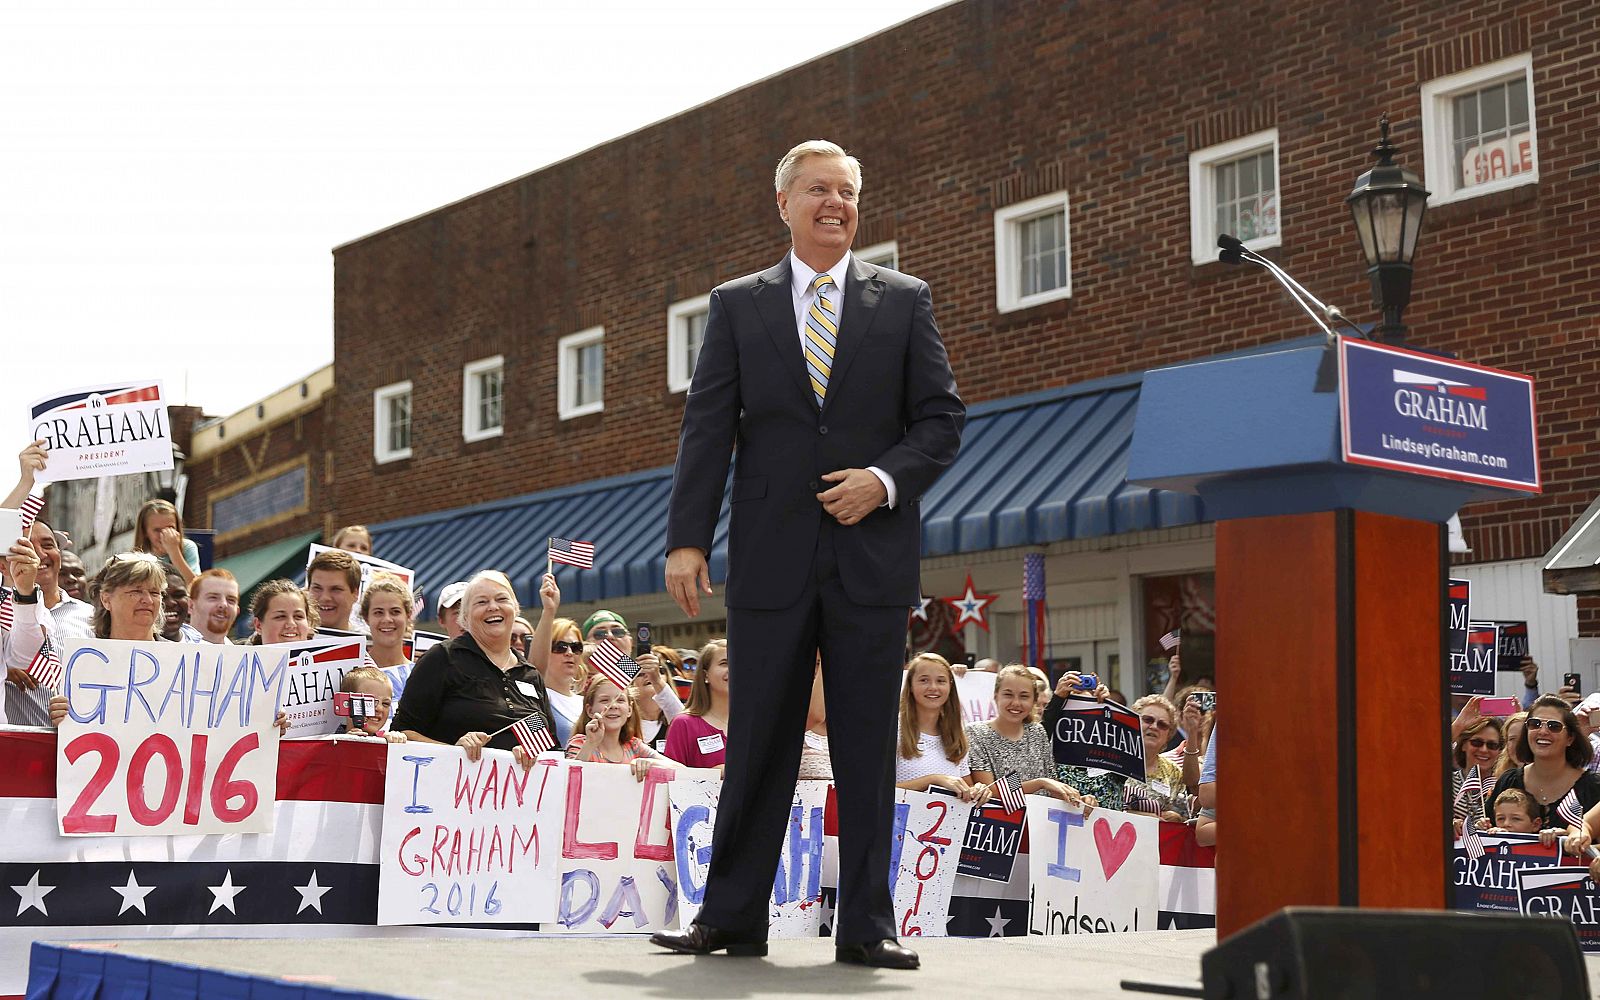 U.S. Republican presidential candidate Graham arrives onstage to formally announce his campaign for the 2016 Republican presidential nomination in Central, South Carolina